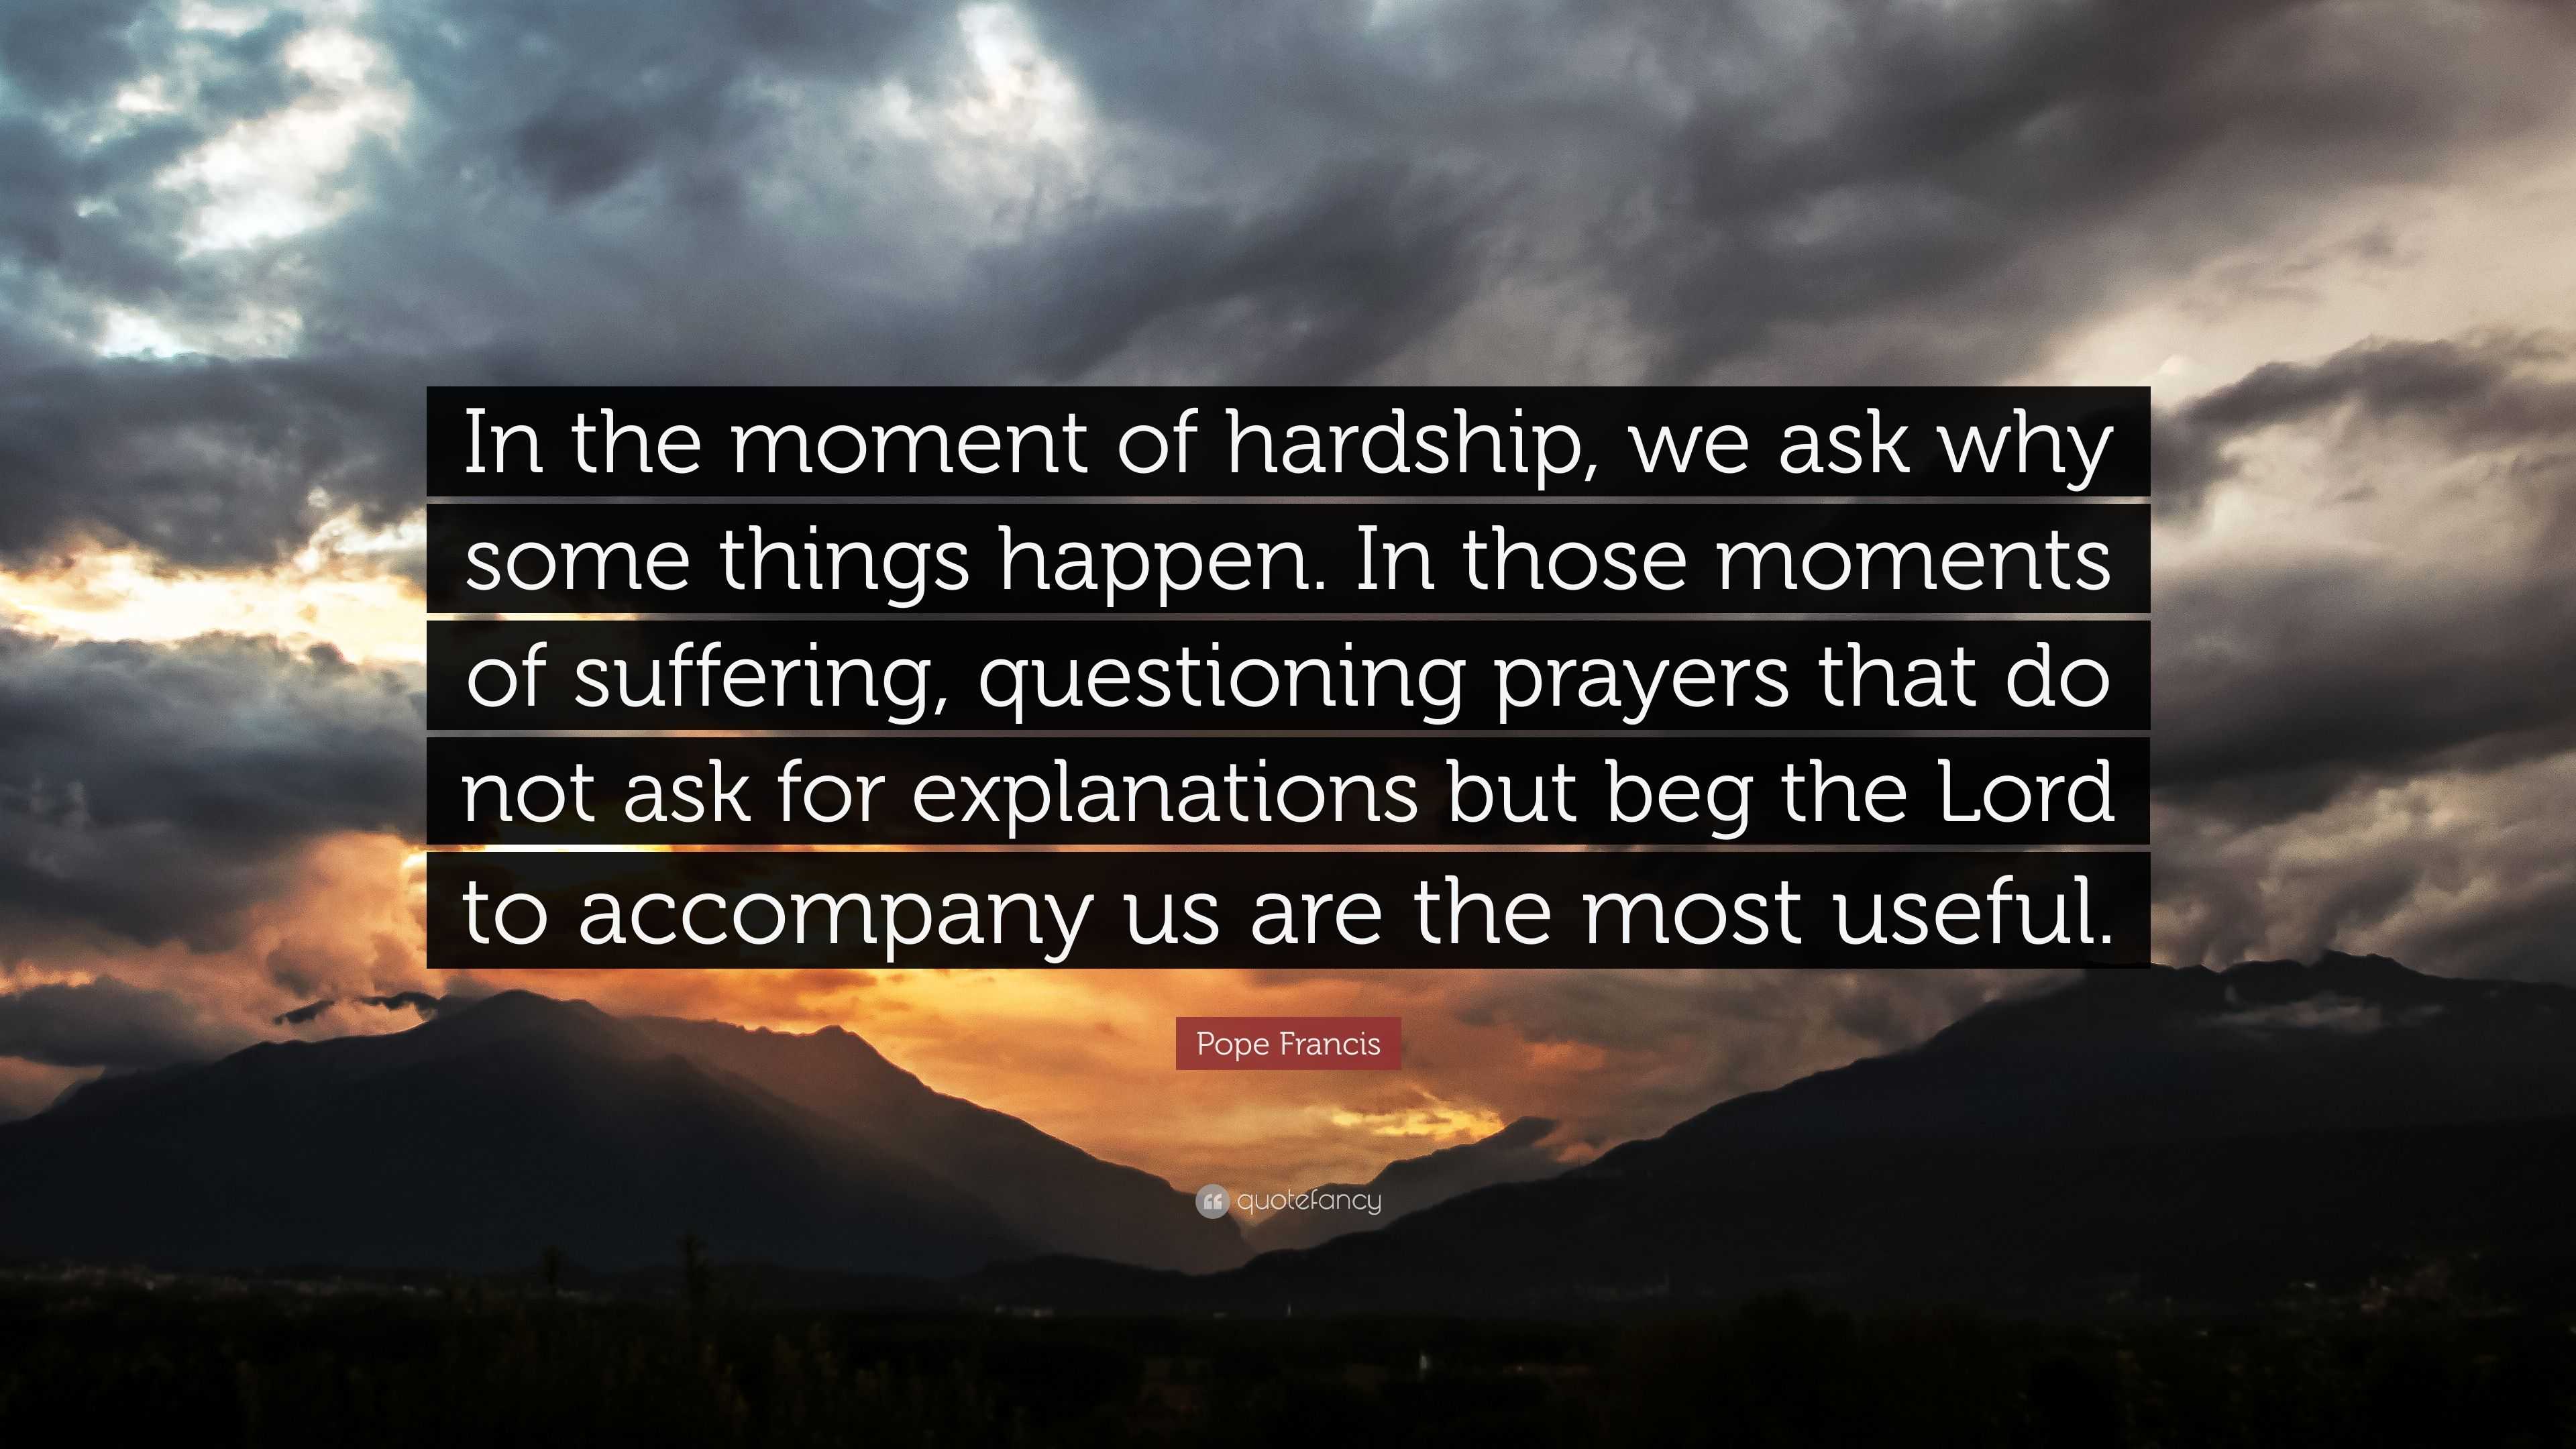 Pope Francis Quote: “In the moment of hardship, we ask why some things ...